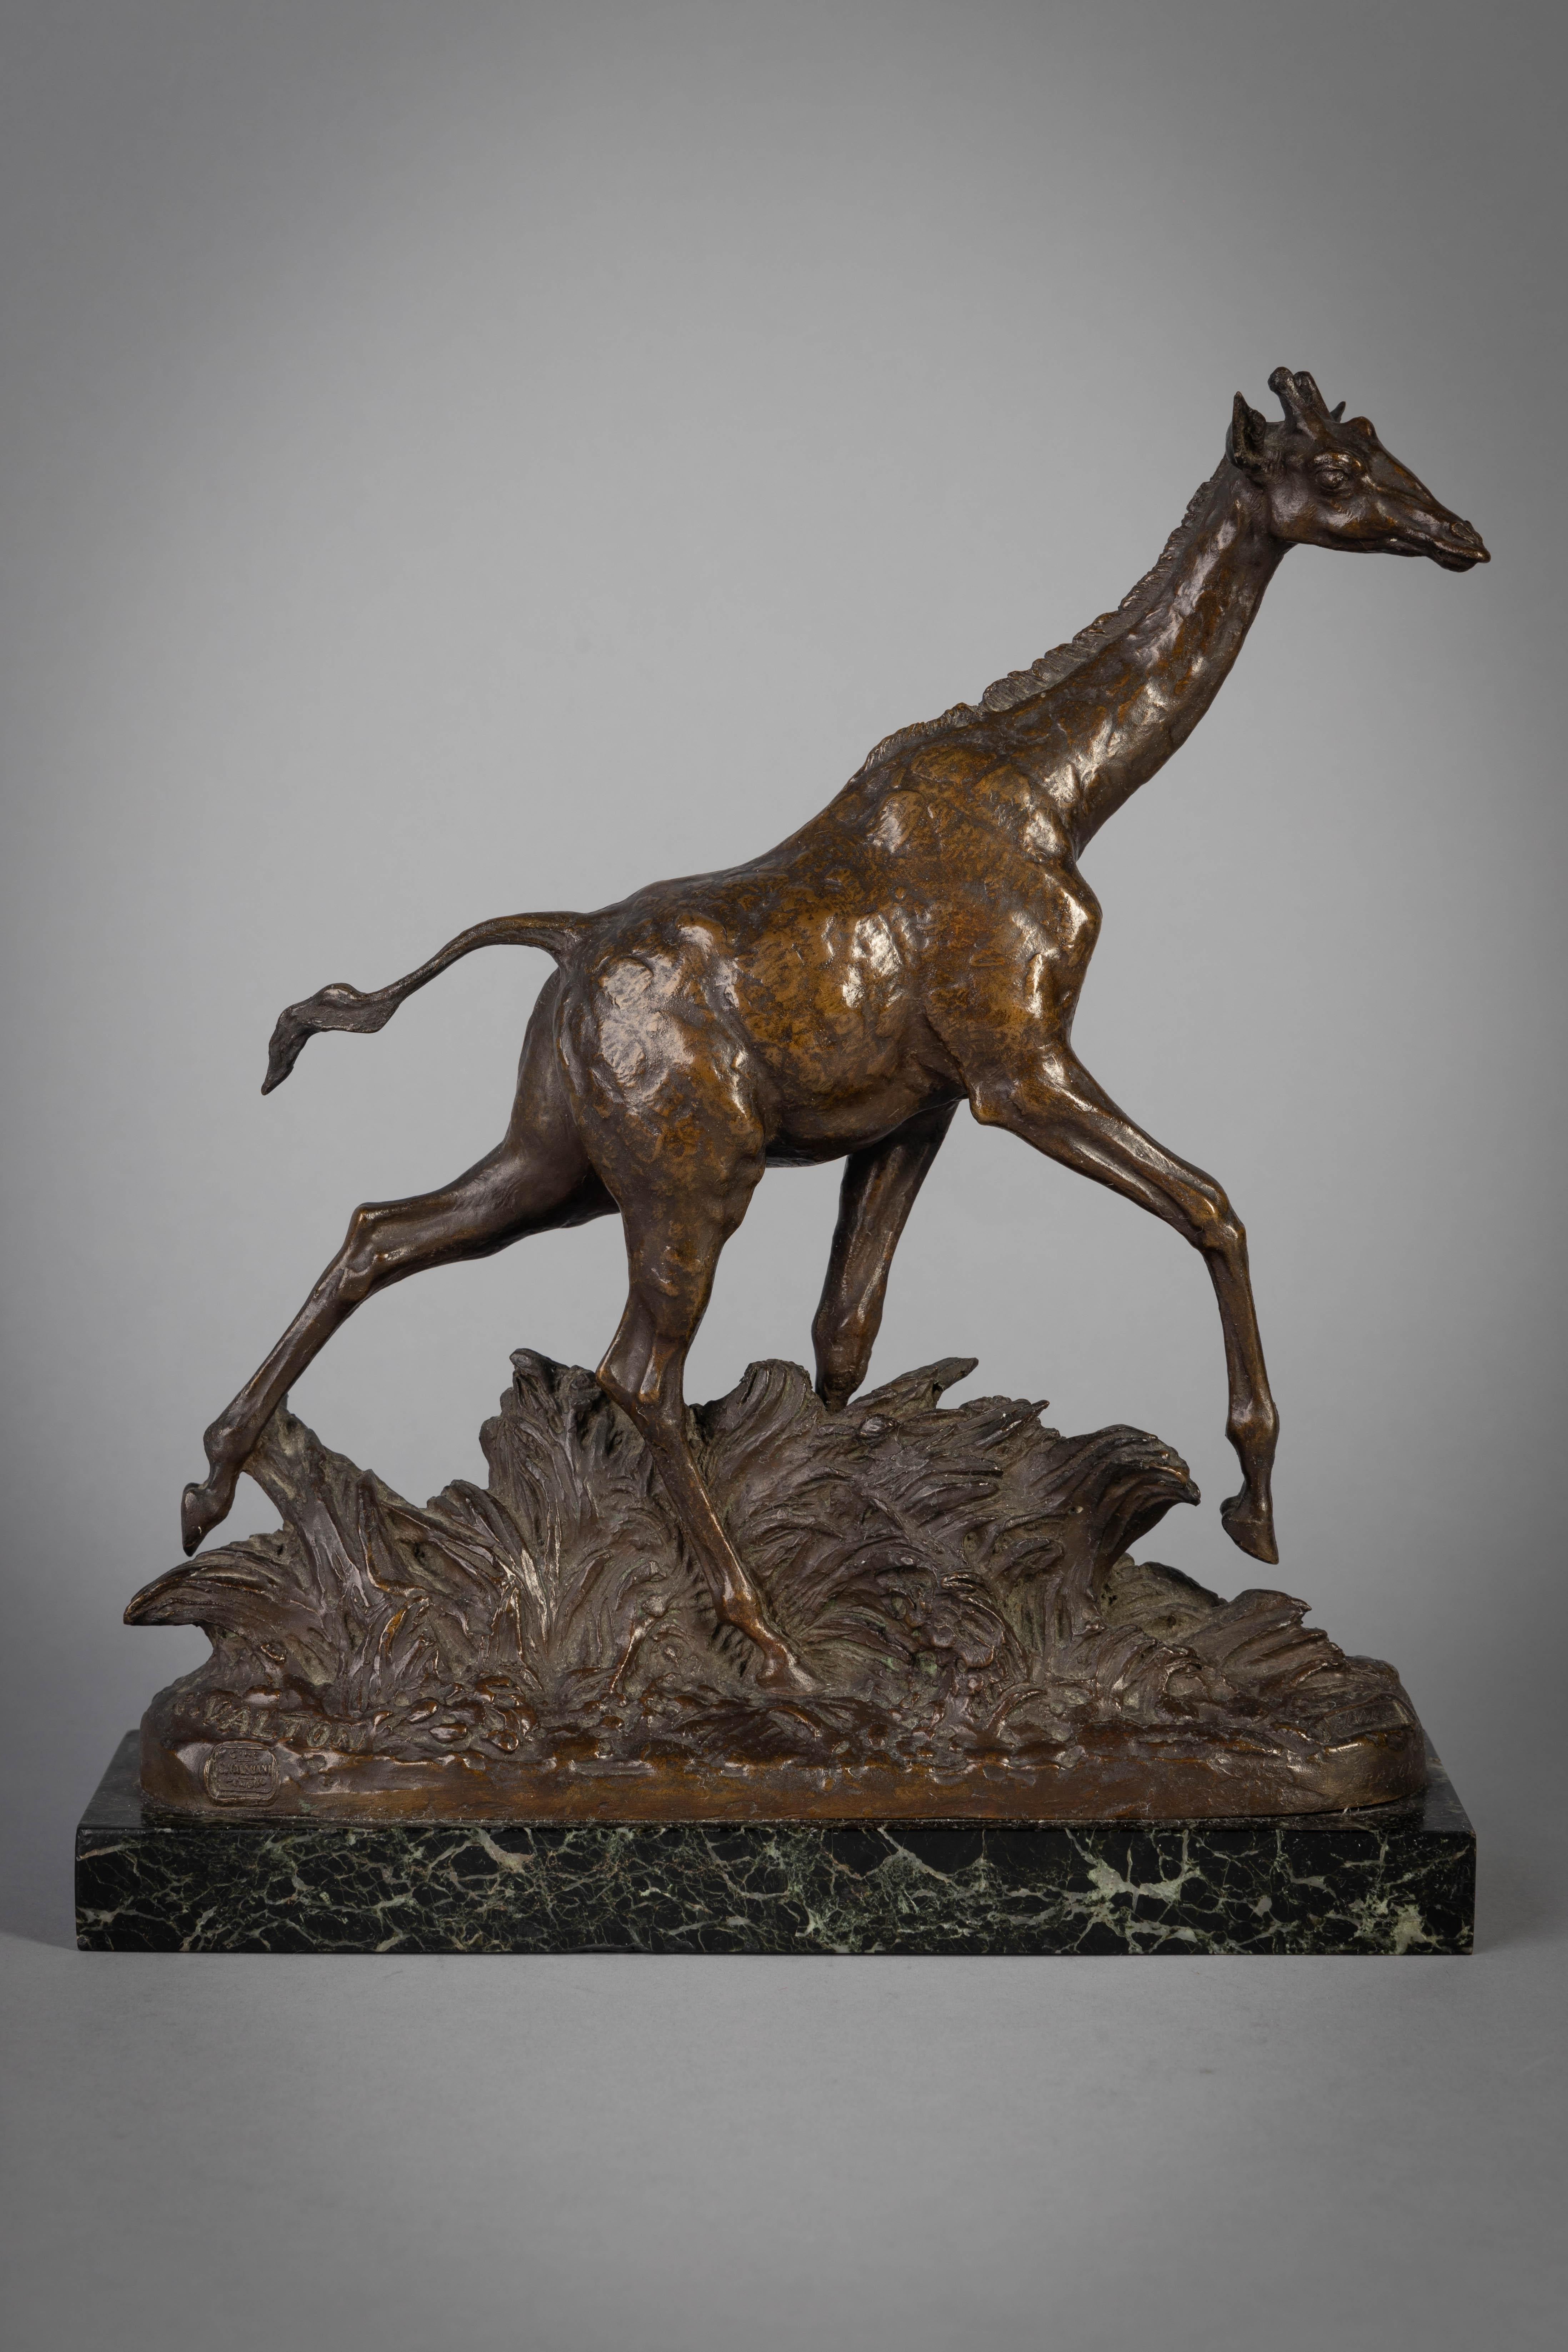 French bronze figure of a striding giraffe, by Charles Valton (1851-1918), circa 1905

Inscribed C. Valton and impressed Valsuani Foundry mark.